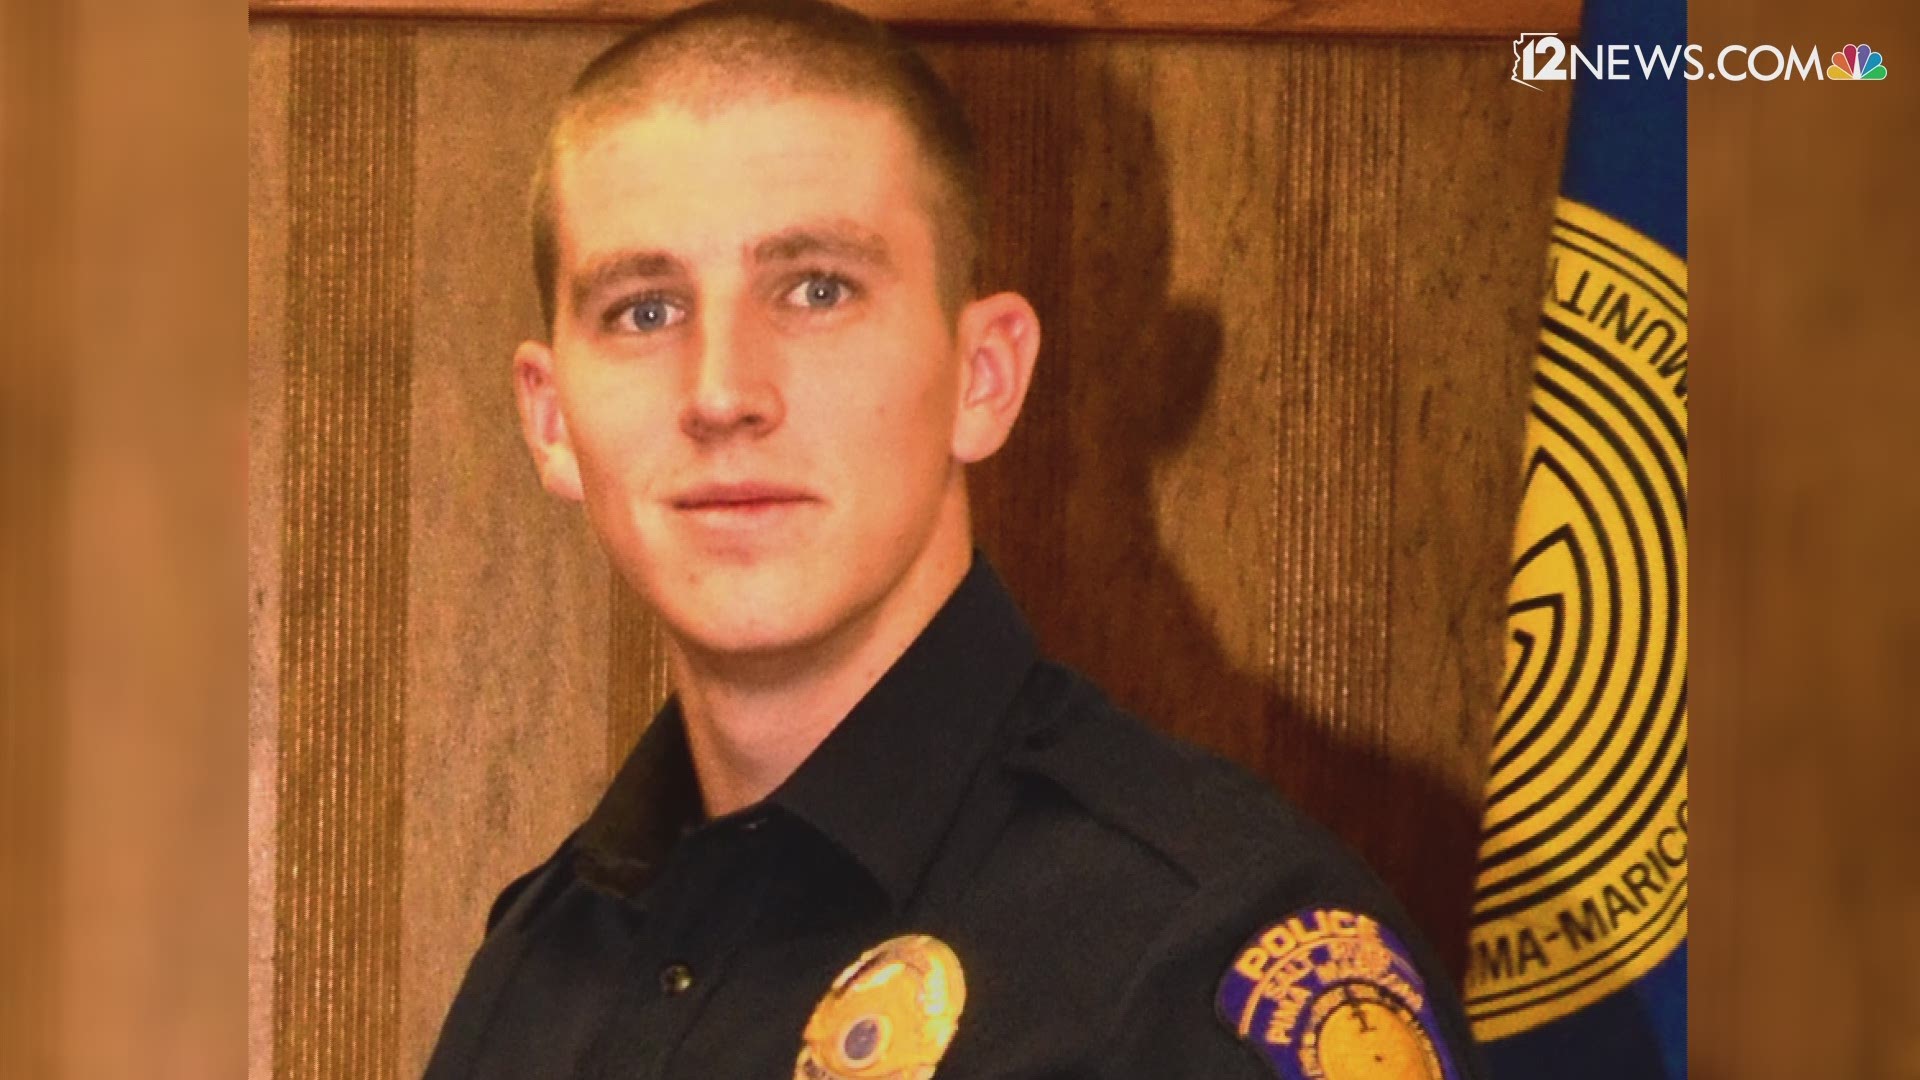 The Salt River Police Department has released audio for Officer Clayton Townsend's Last Call. Officer Townsend was hit and killed on Jan. 8, 2019 when a distracted driver struck him while he was making a traffic stop.